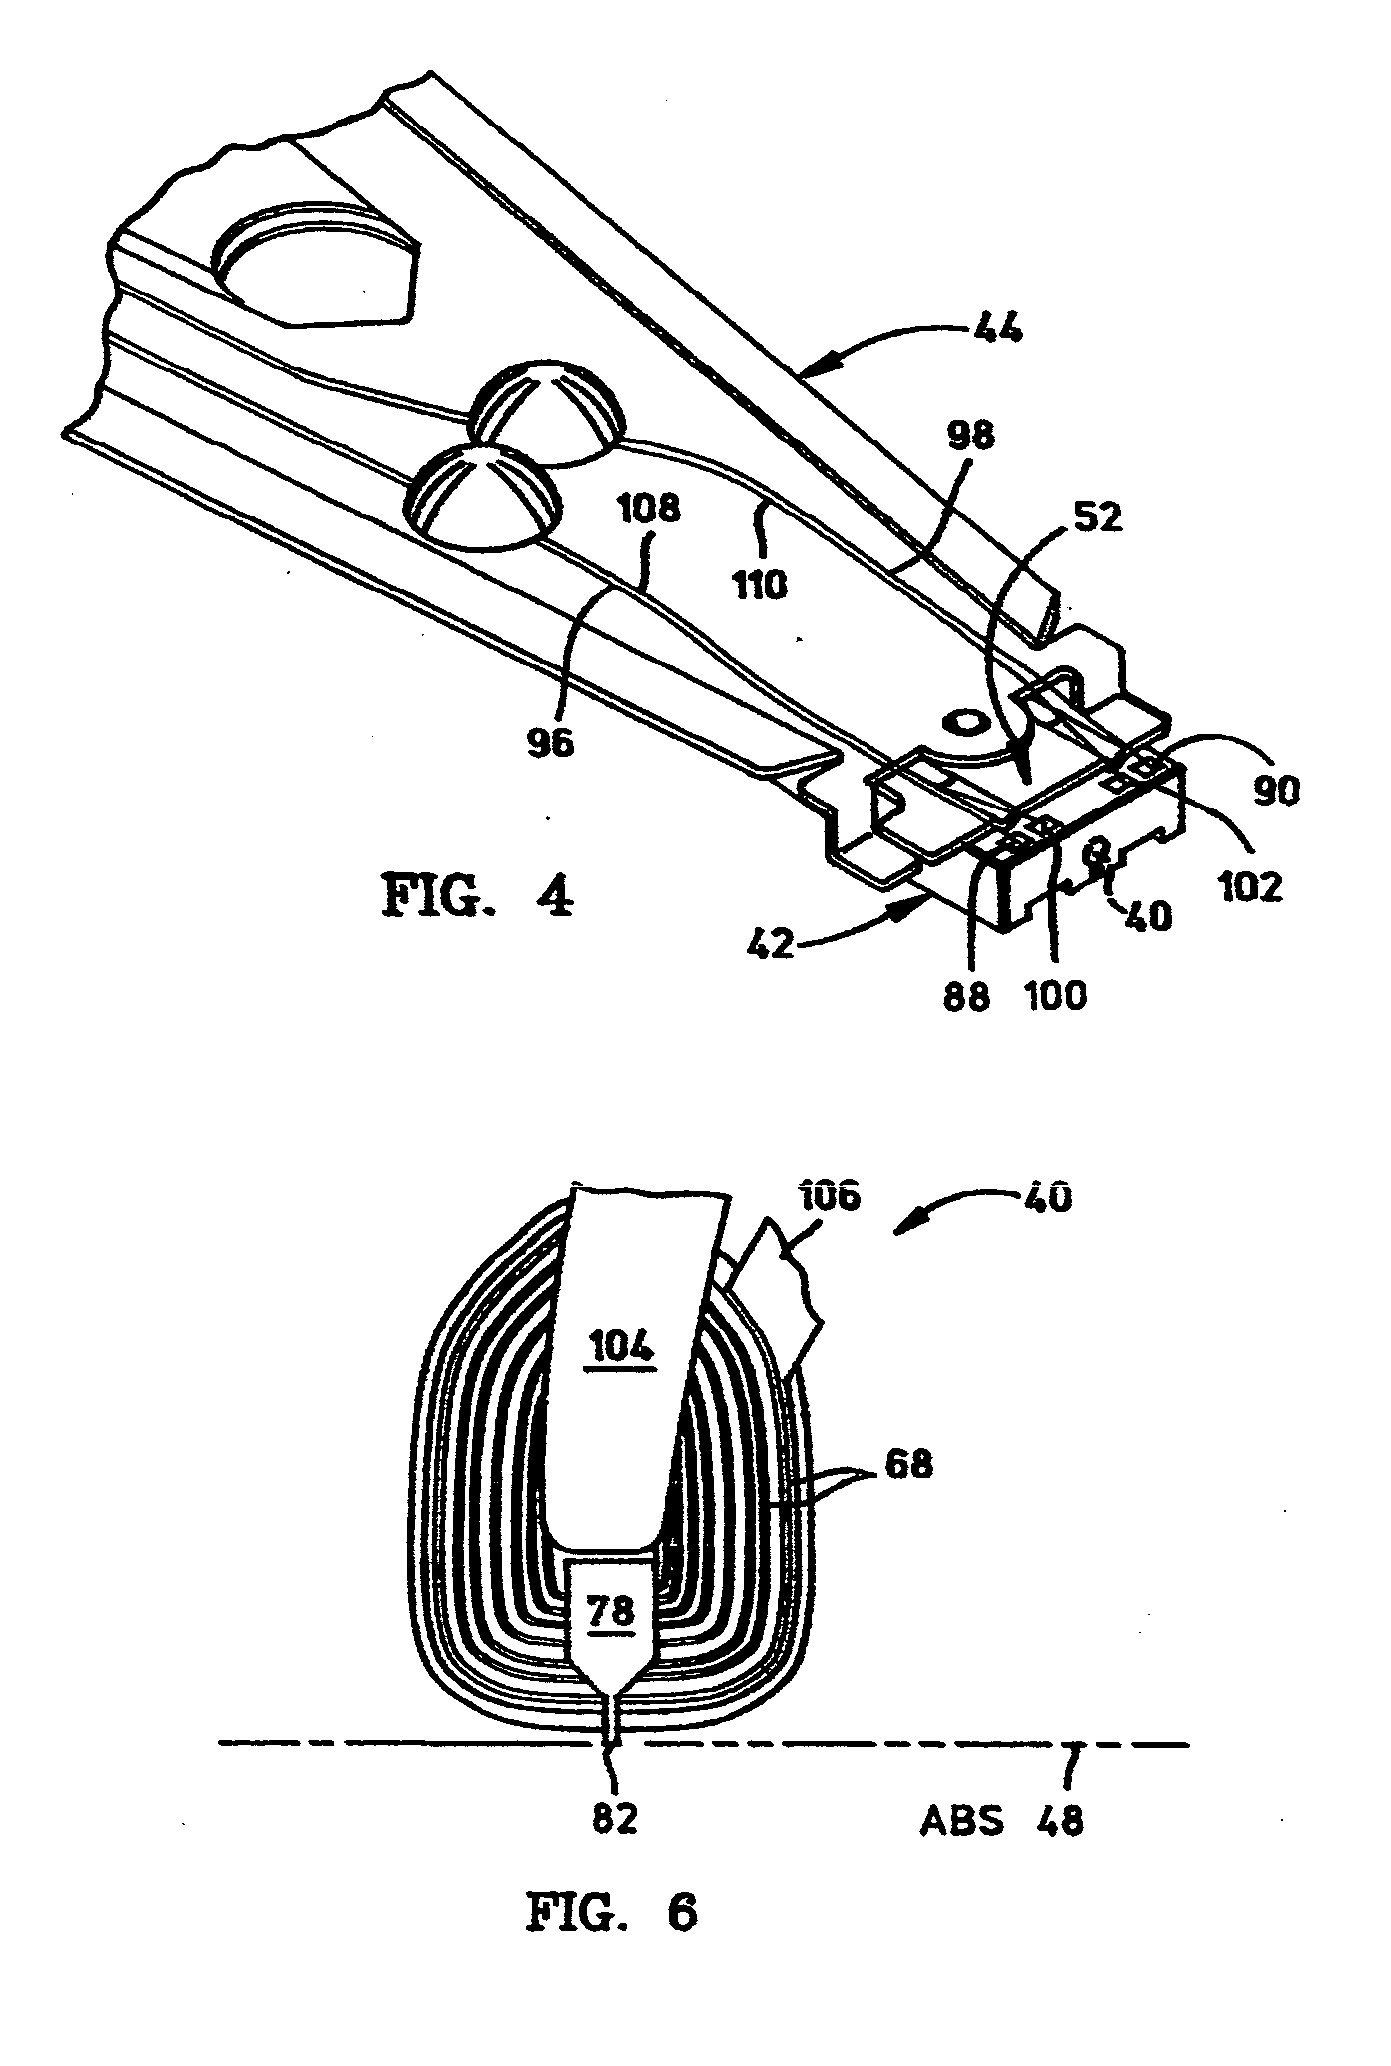 Methods of forming an electrical connection in a magnetic head using a damascene process